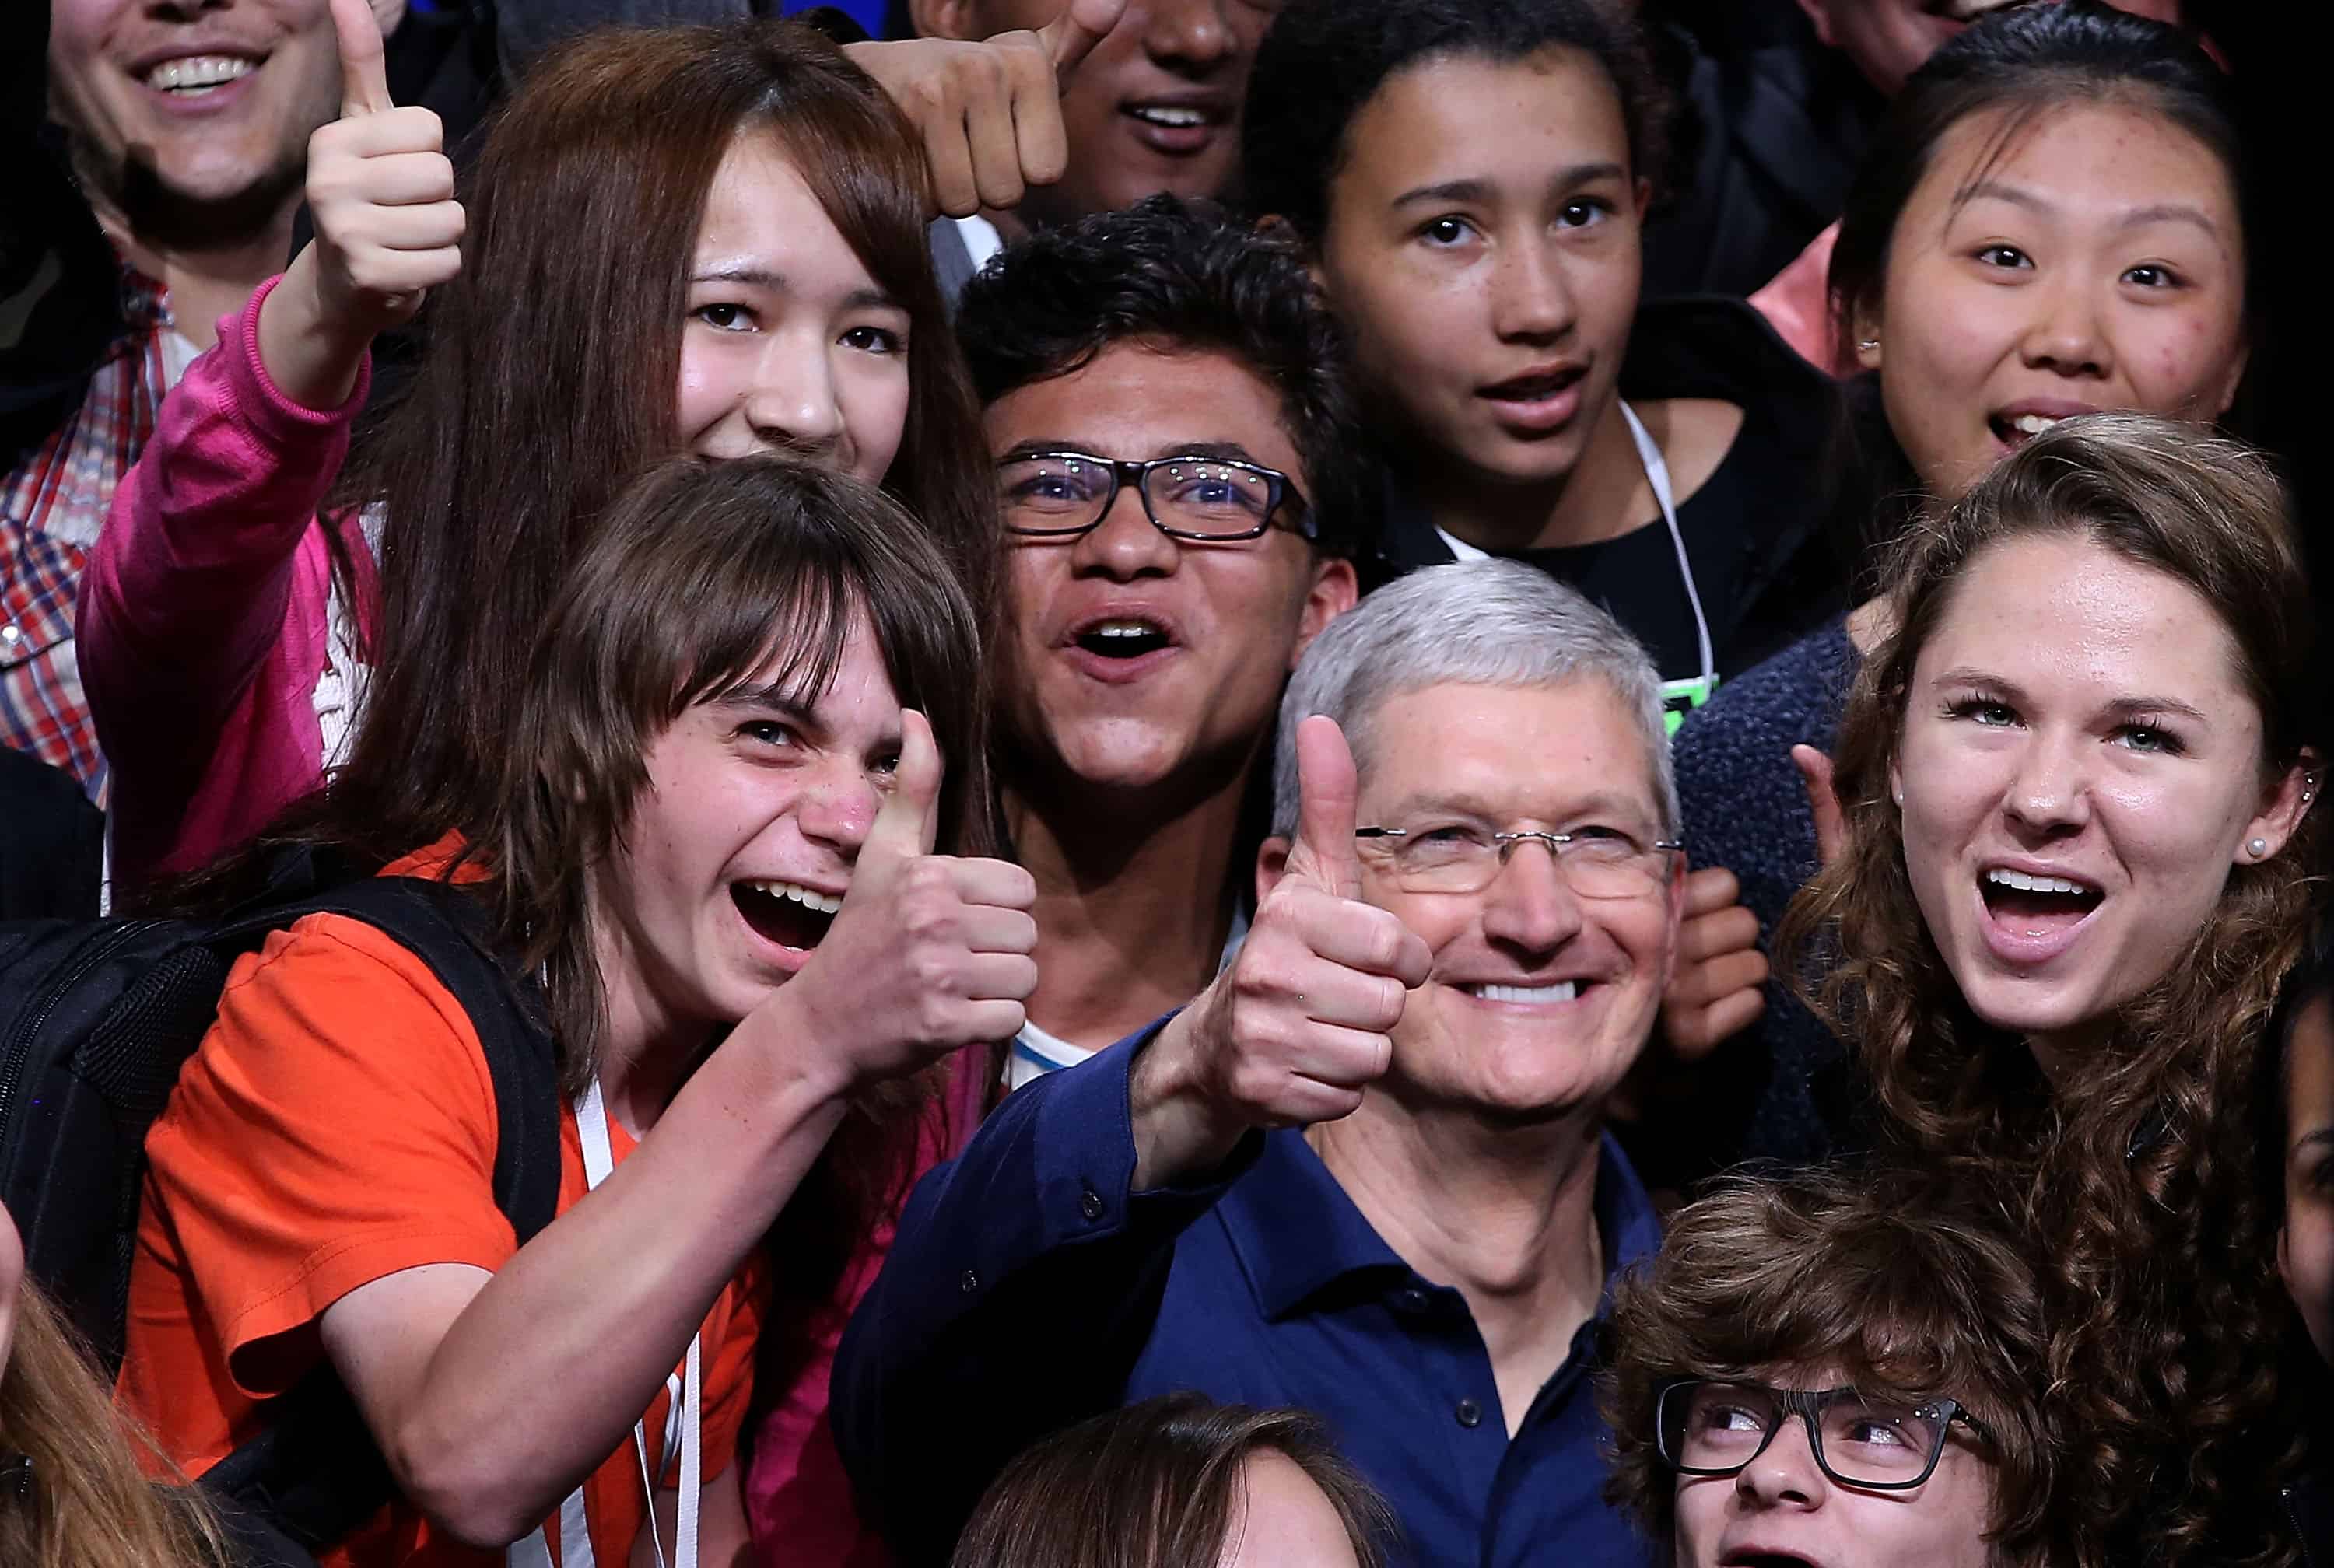 Apple CEO Tim Cook, center, poses for a photo with high school kids.